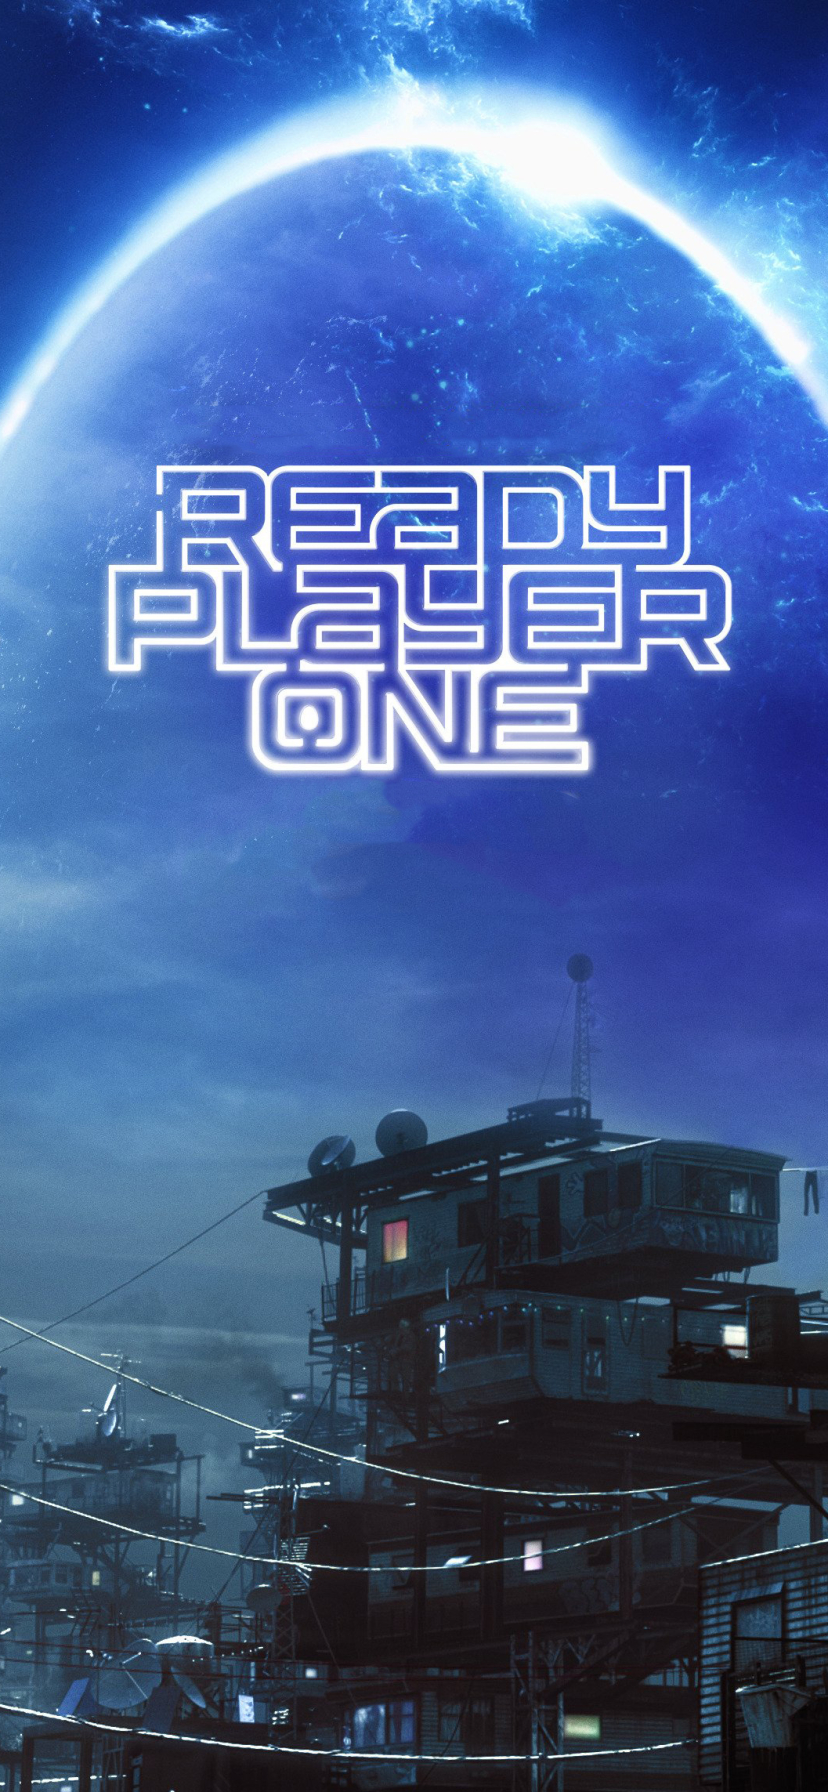 Ready Player One Phone Wallpaper